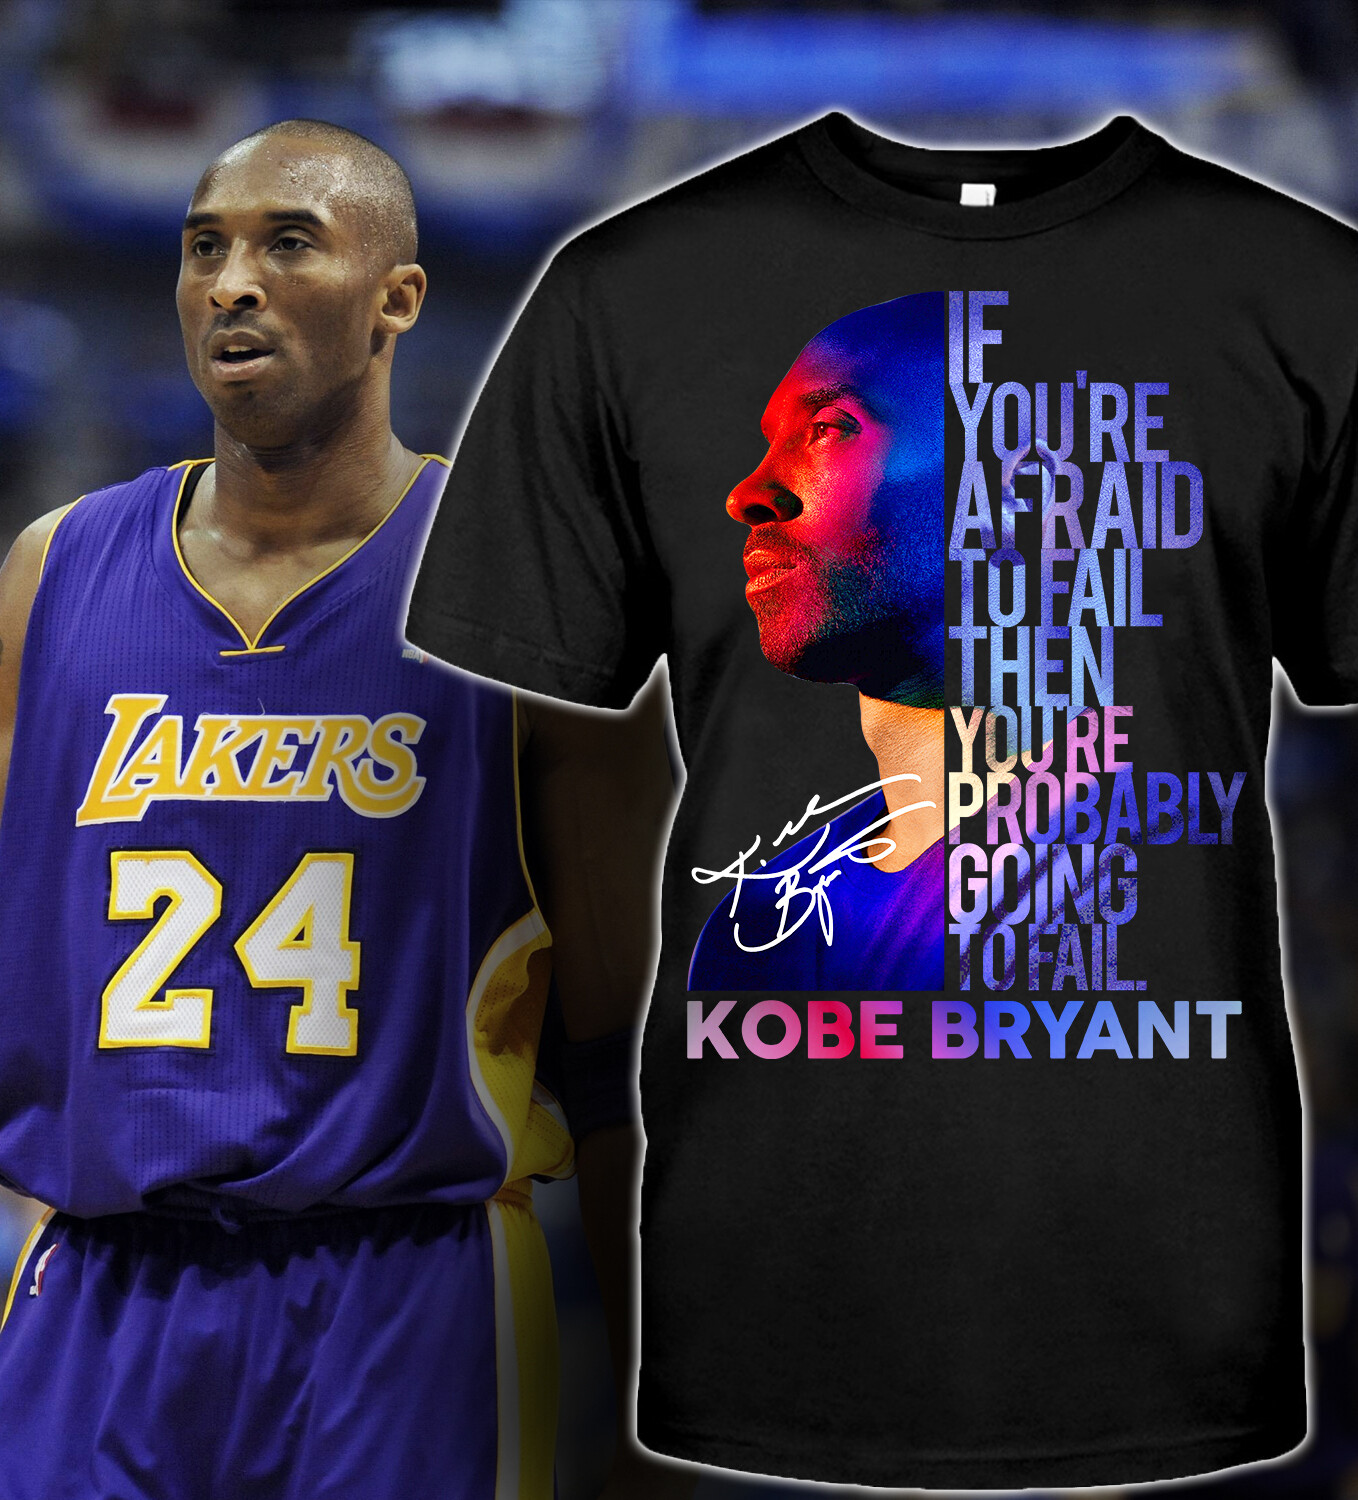 If You’re Afraid To Fail Then You’re Probably Going To Fail Kobe Bryant T-Shirt